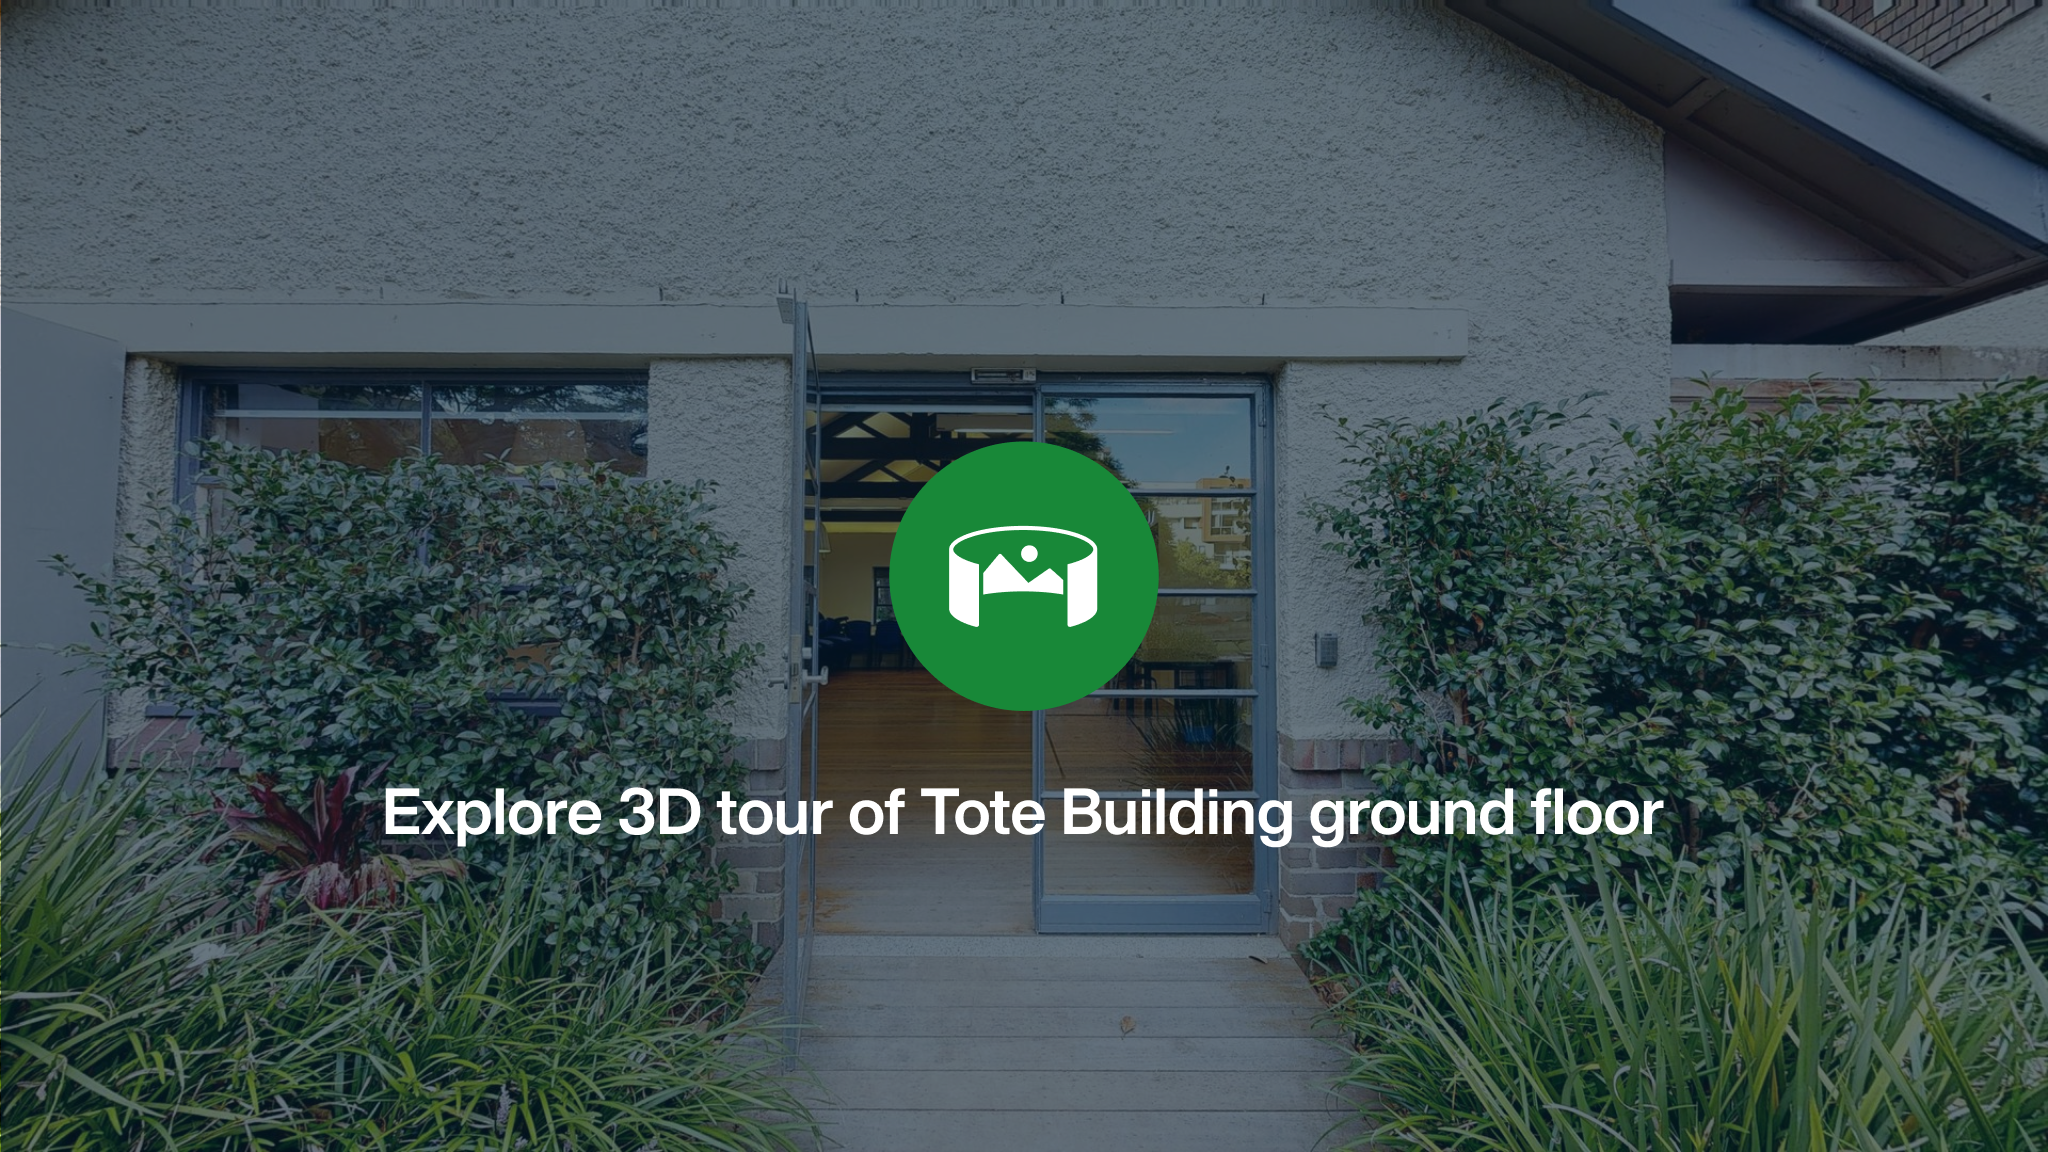 The front entrance to Tote Building overlayed with a green icon and the words Explore 3D tour of Tote Building.